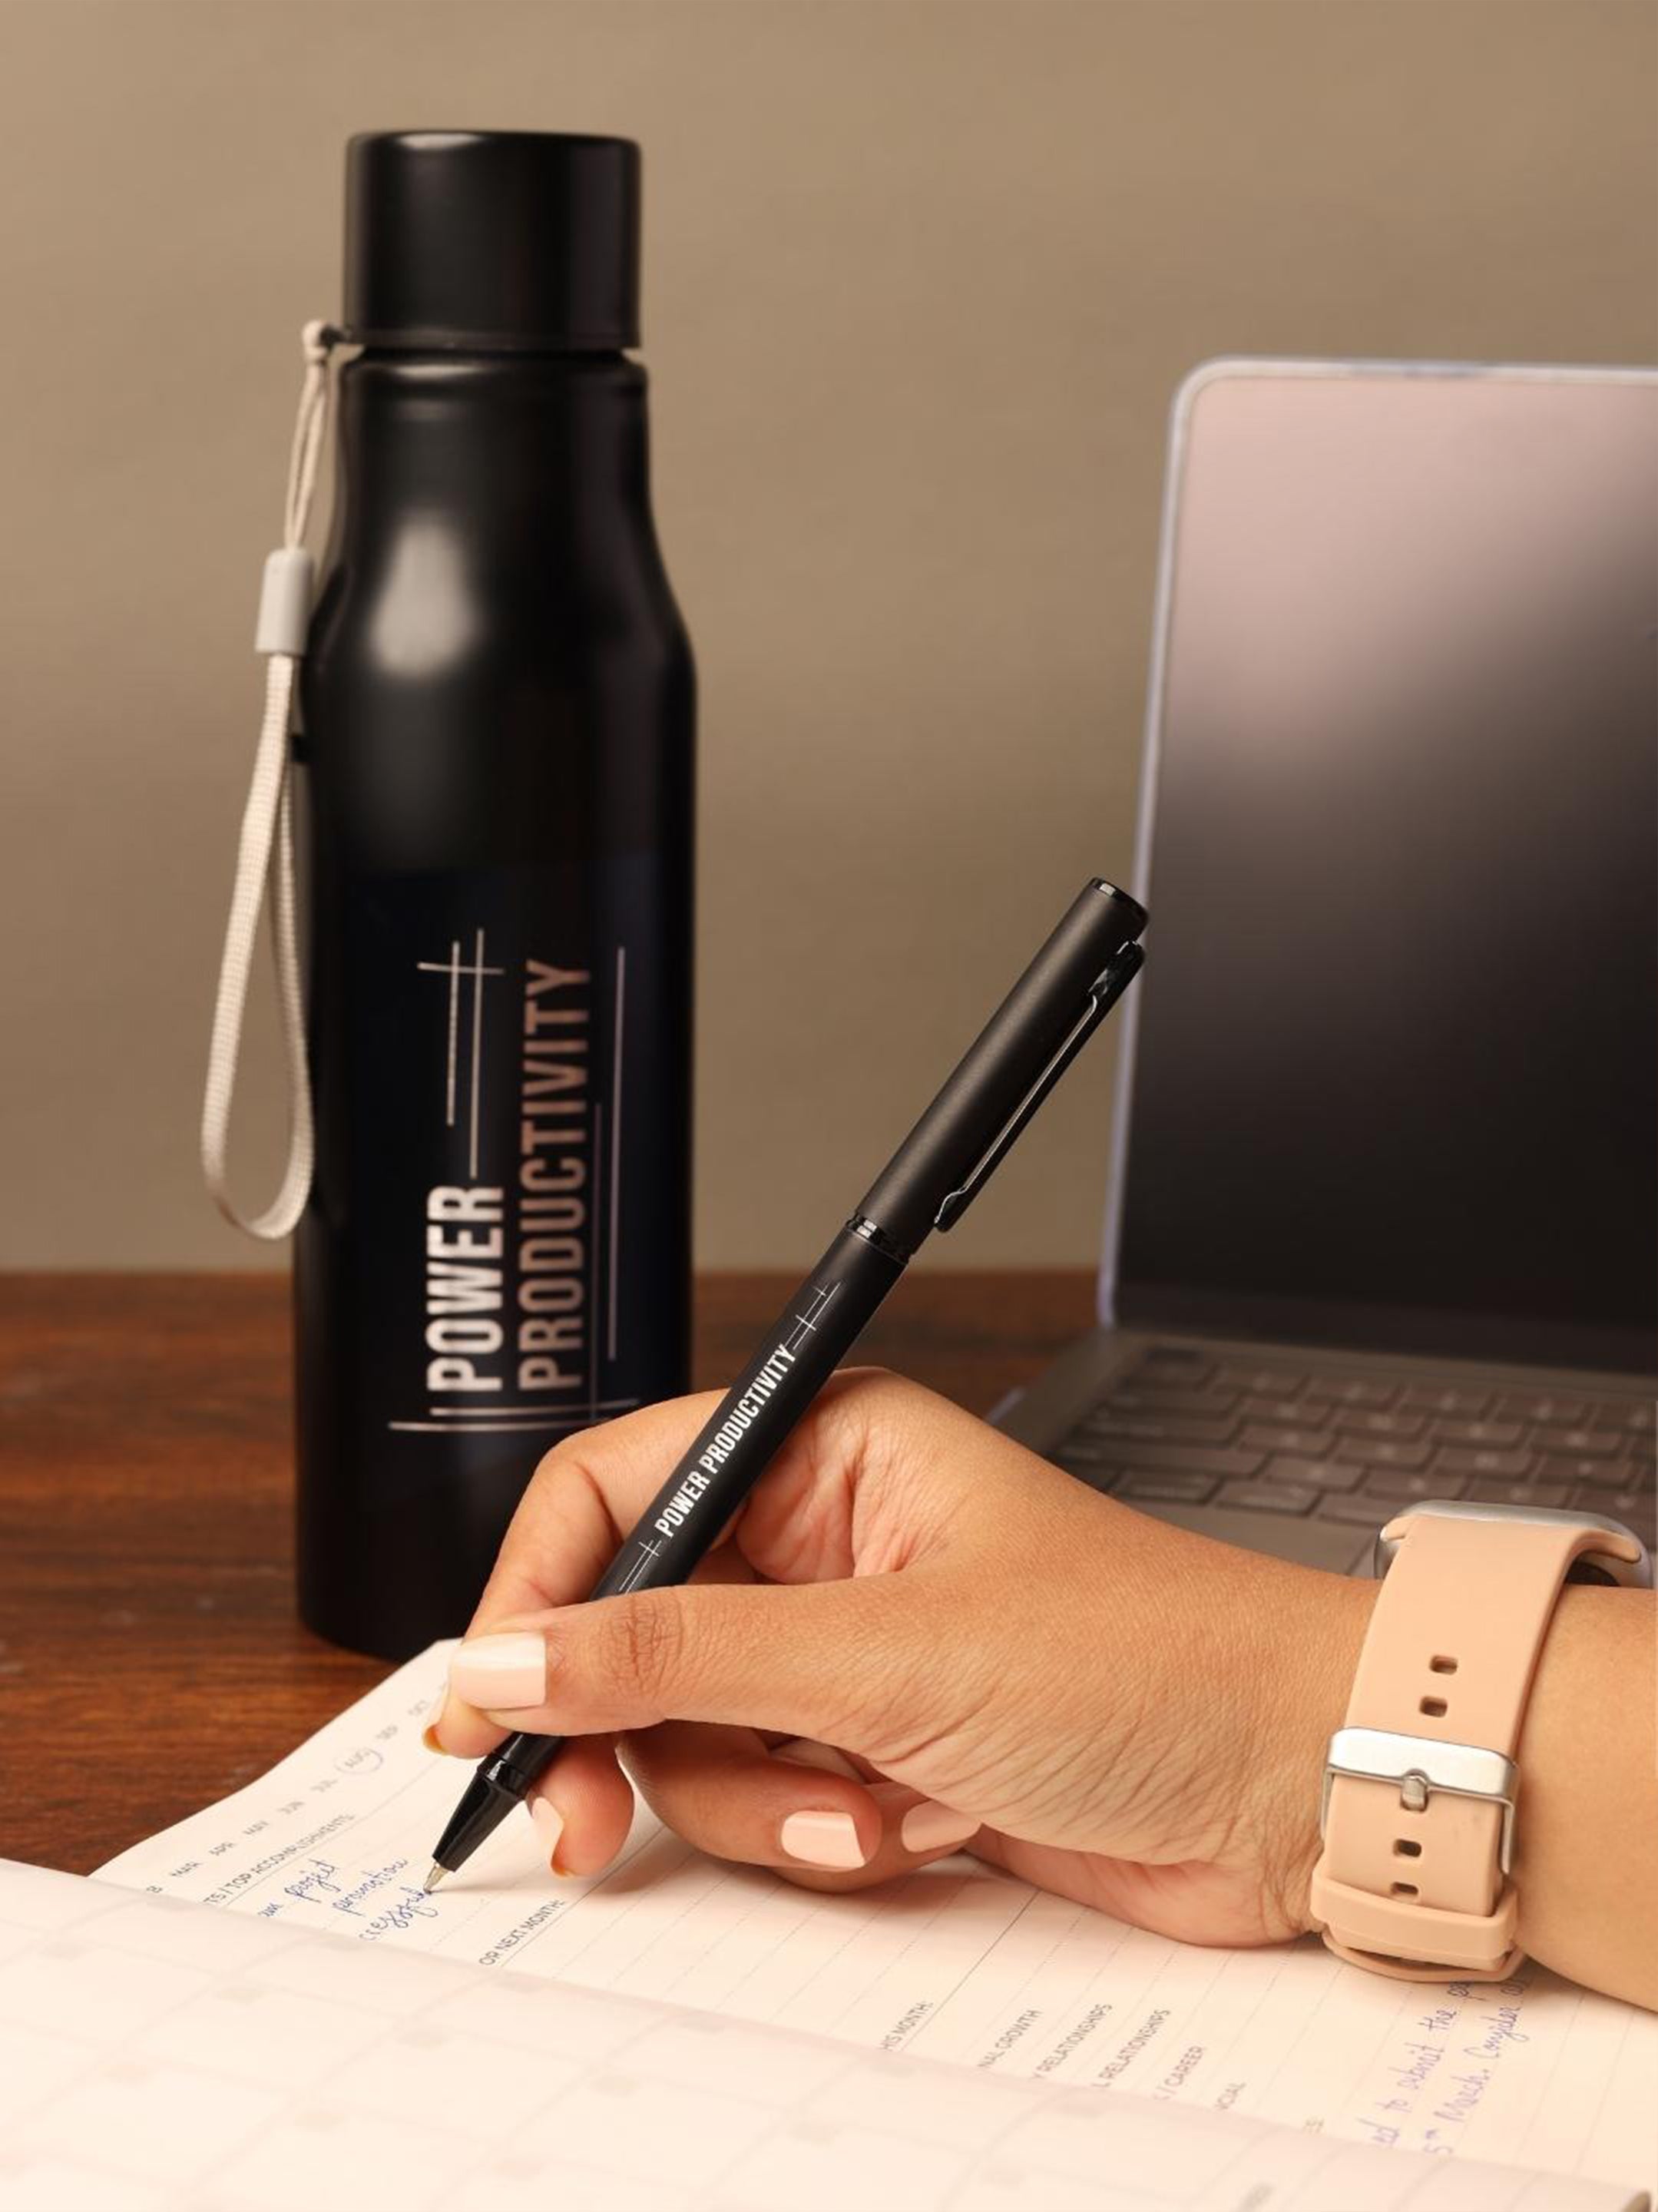 A5 Undated Executive Gift Set Includes Productivity Planner + Pen + Water Bottle (Goal Getter 1)